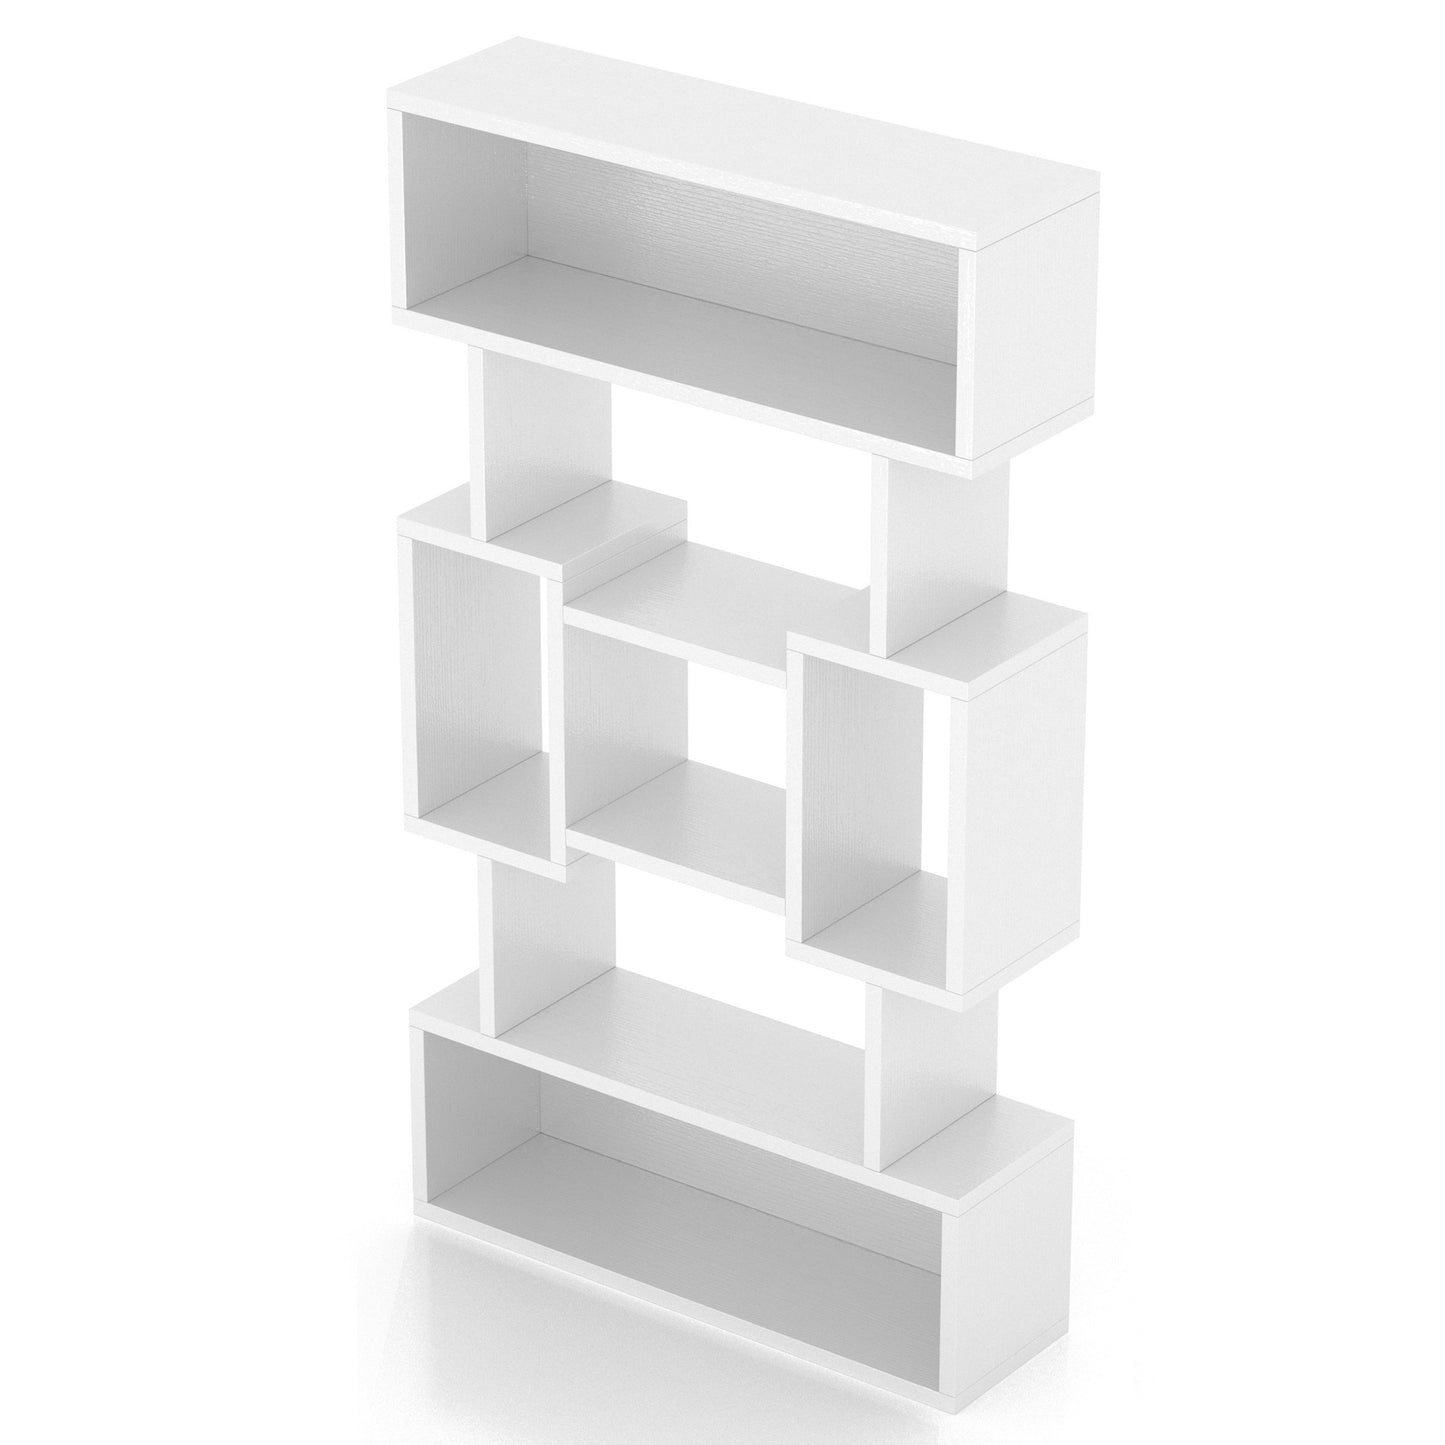 Left angled upper view of a modern white open cubic bookcase display shelf on a white background